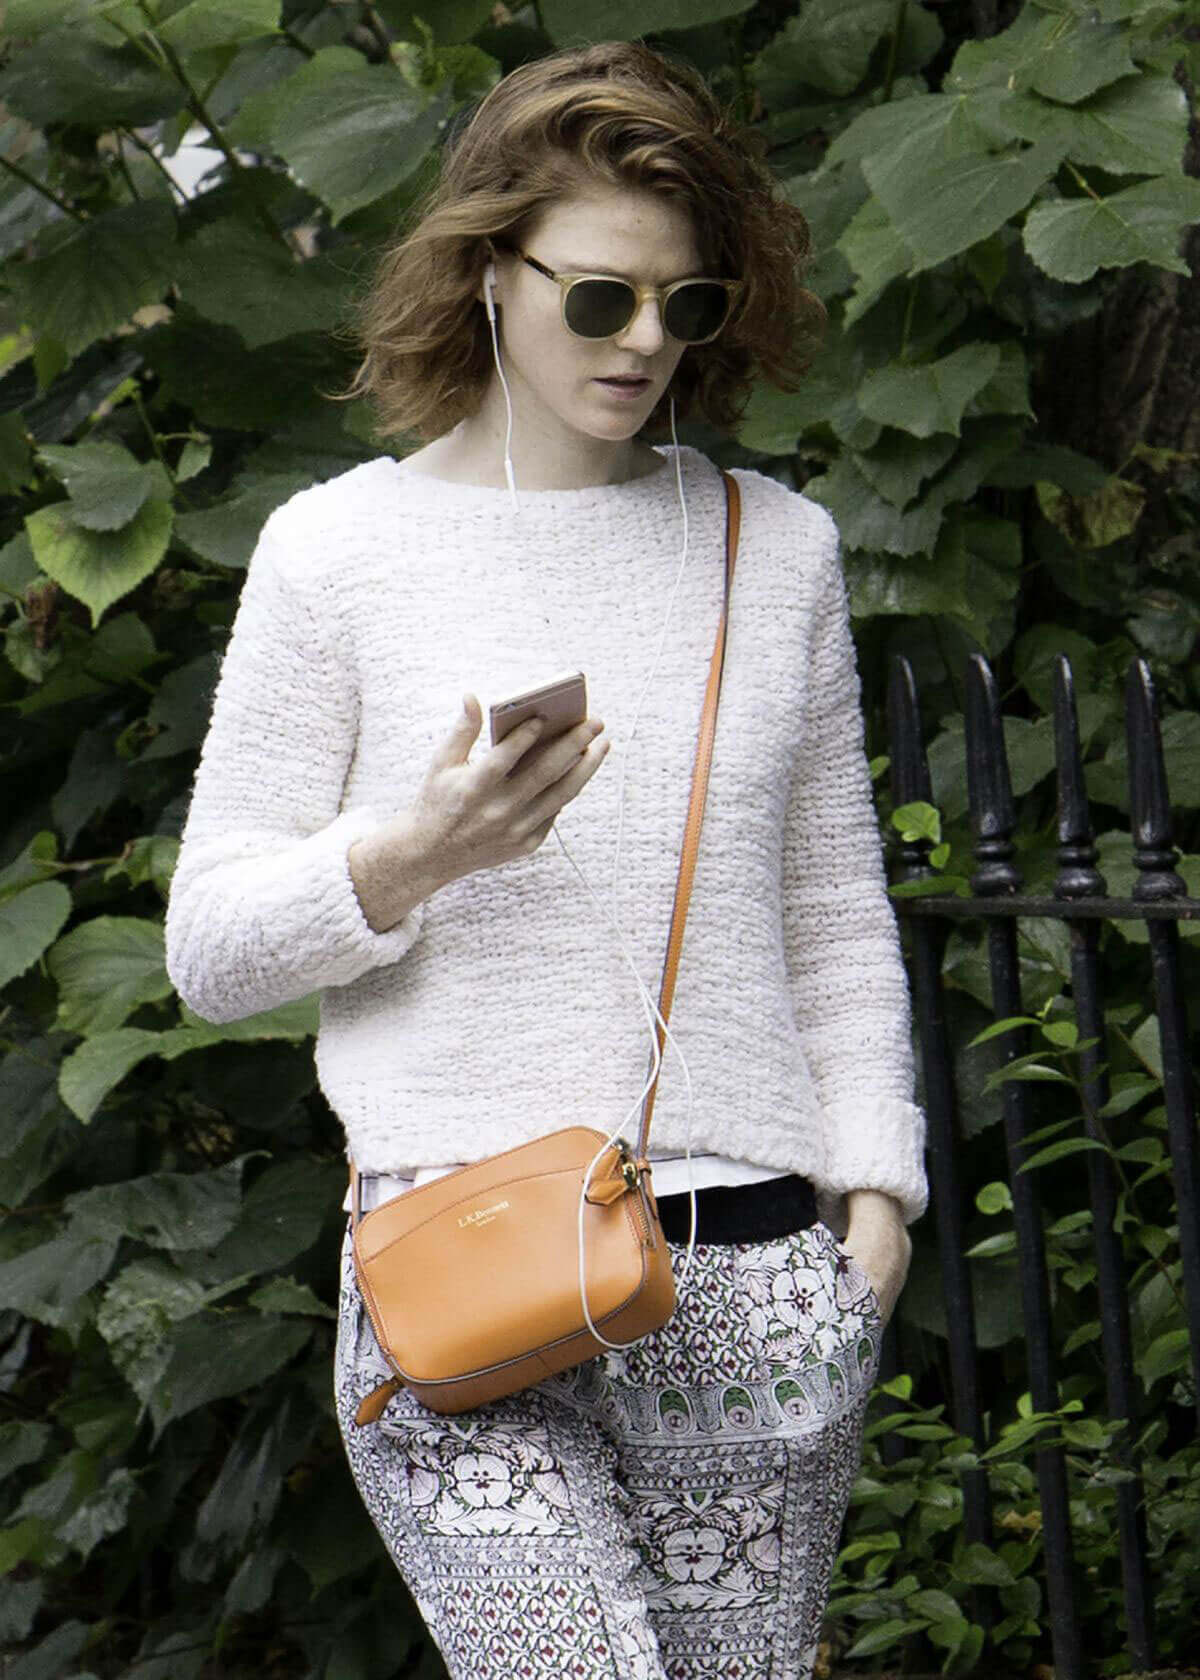 Rose Leslie Stills Out and About in London